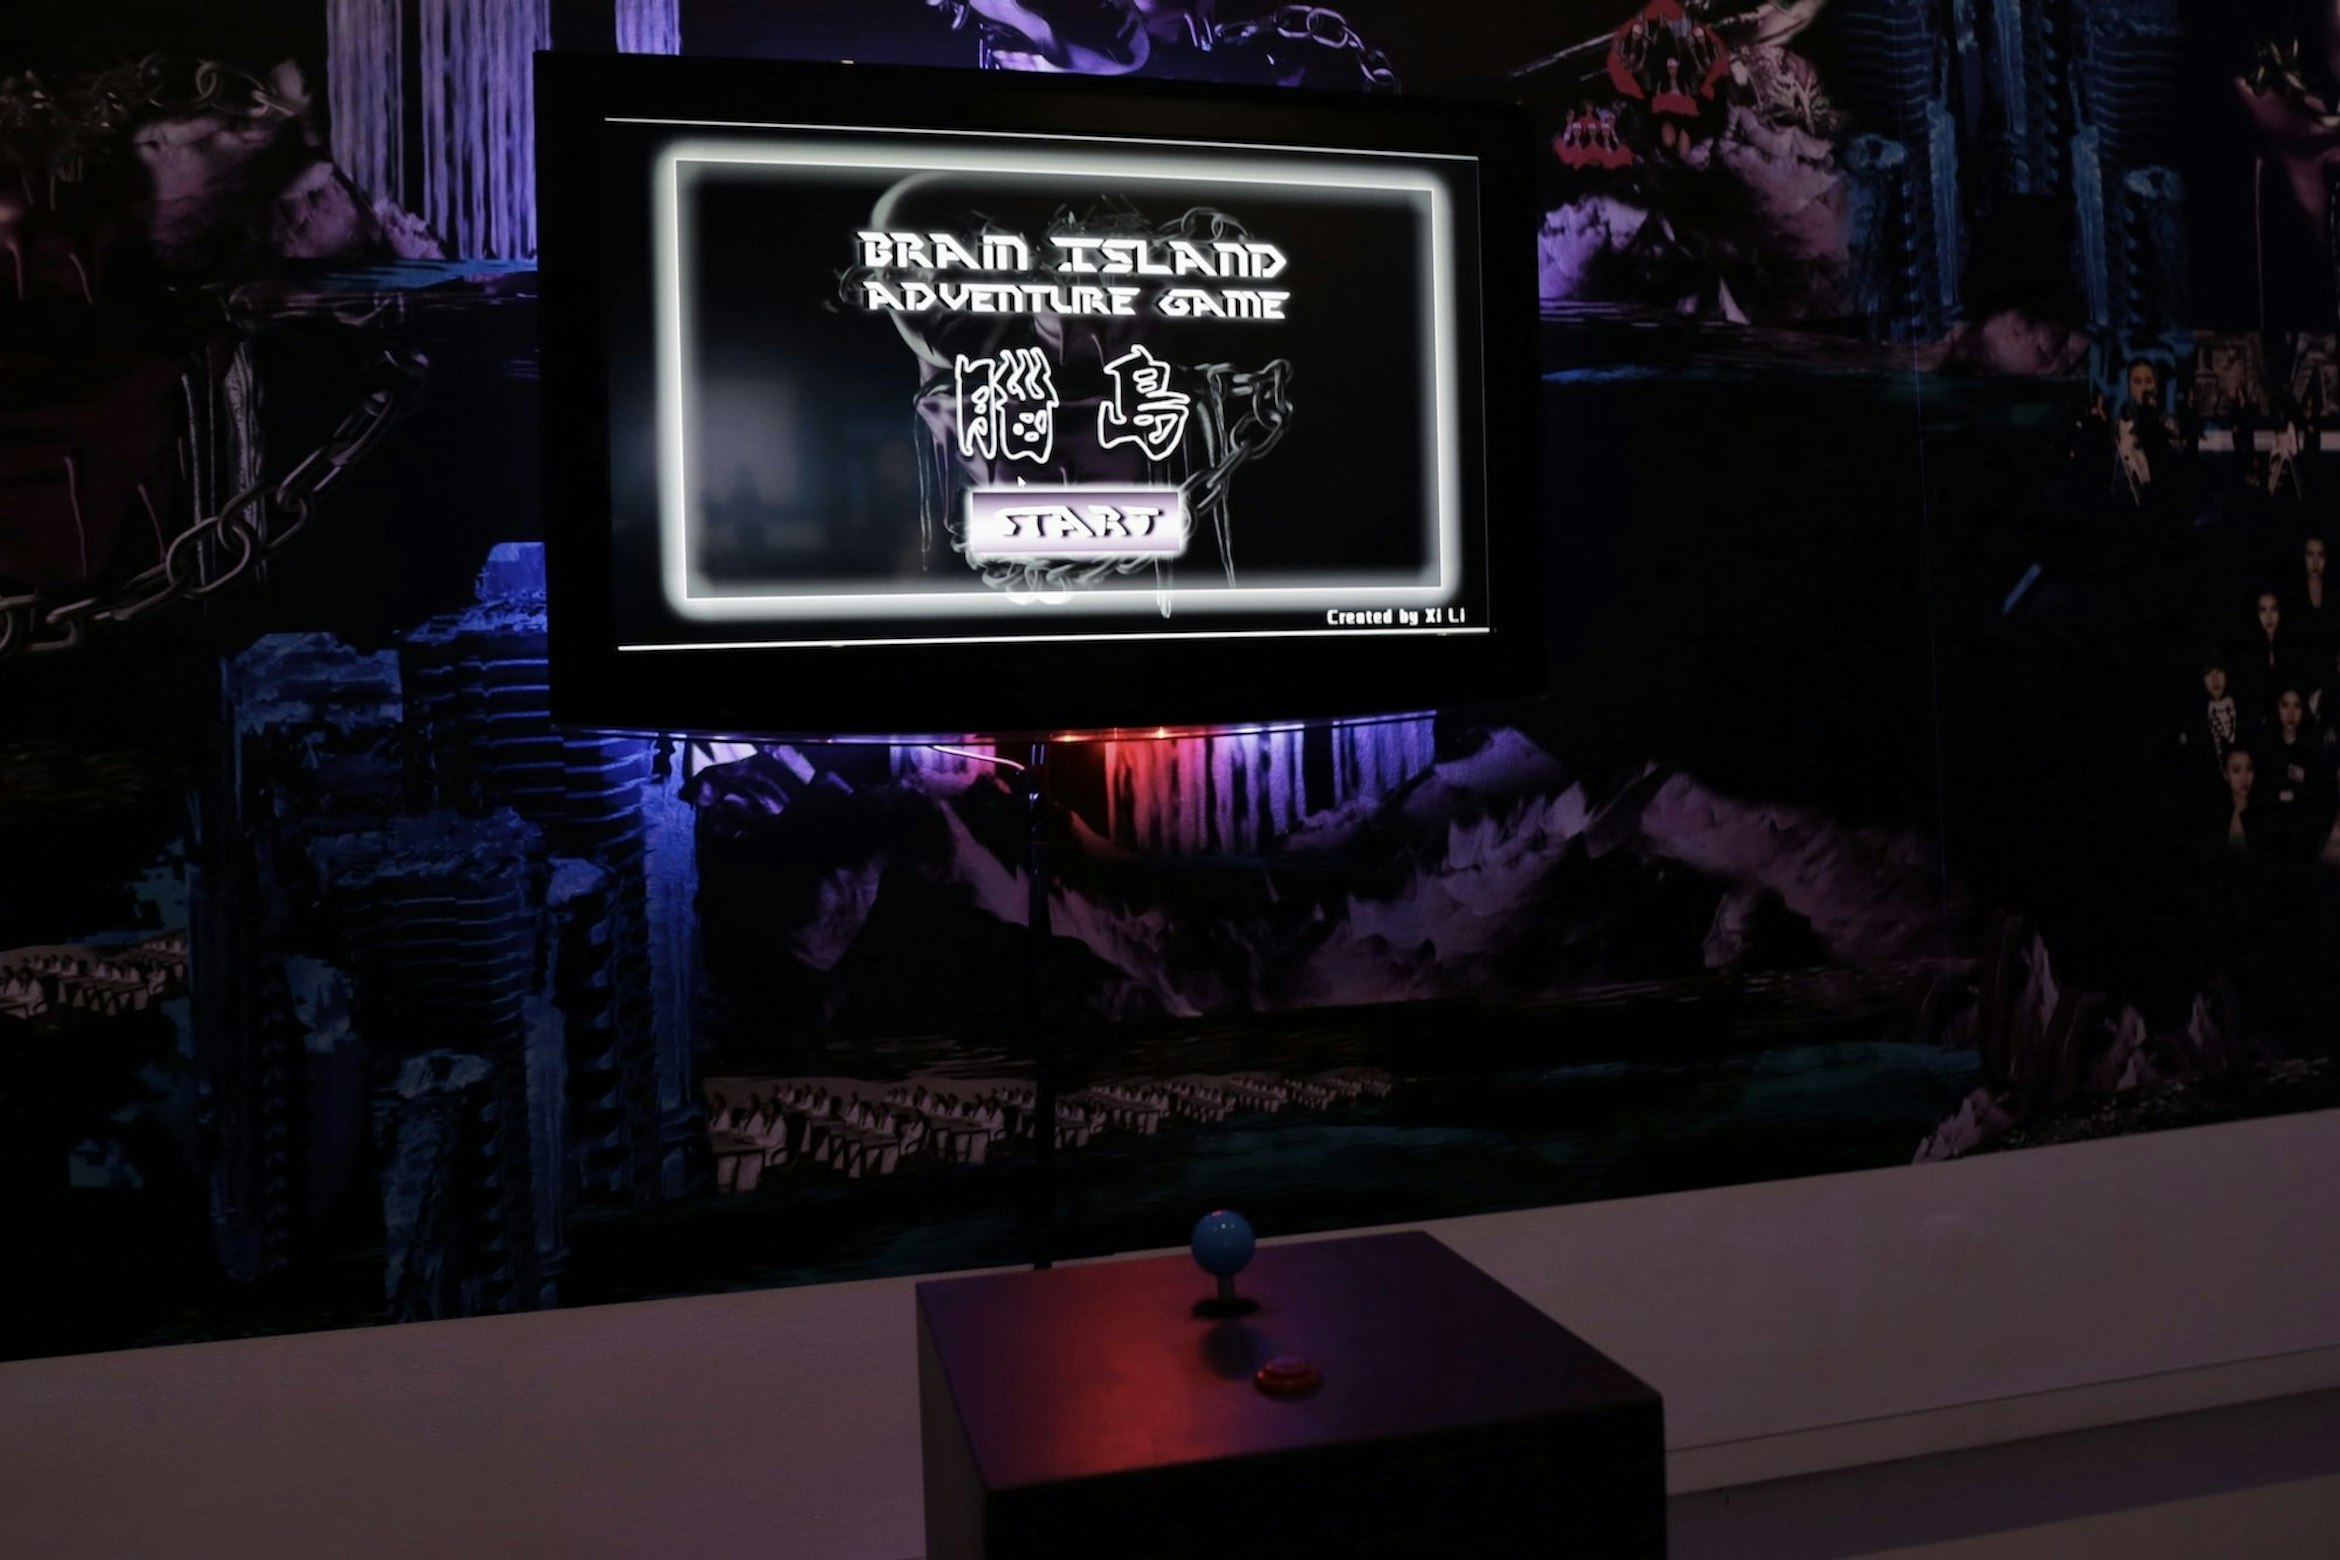 A video game called Brain Island is displayed on an LCD monitor. In front is a blue joystick. Behind the monitor is a series of digital images from the game which are high gloss but whose content indistinct